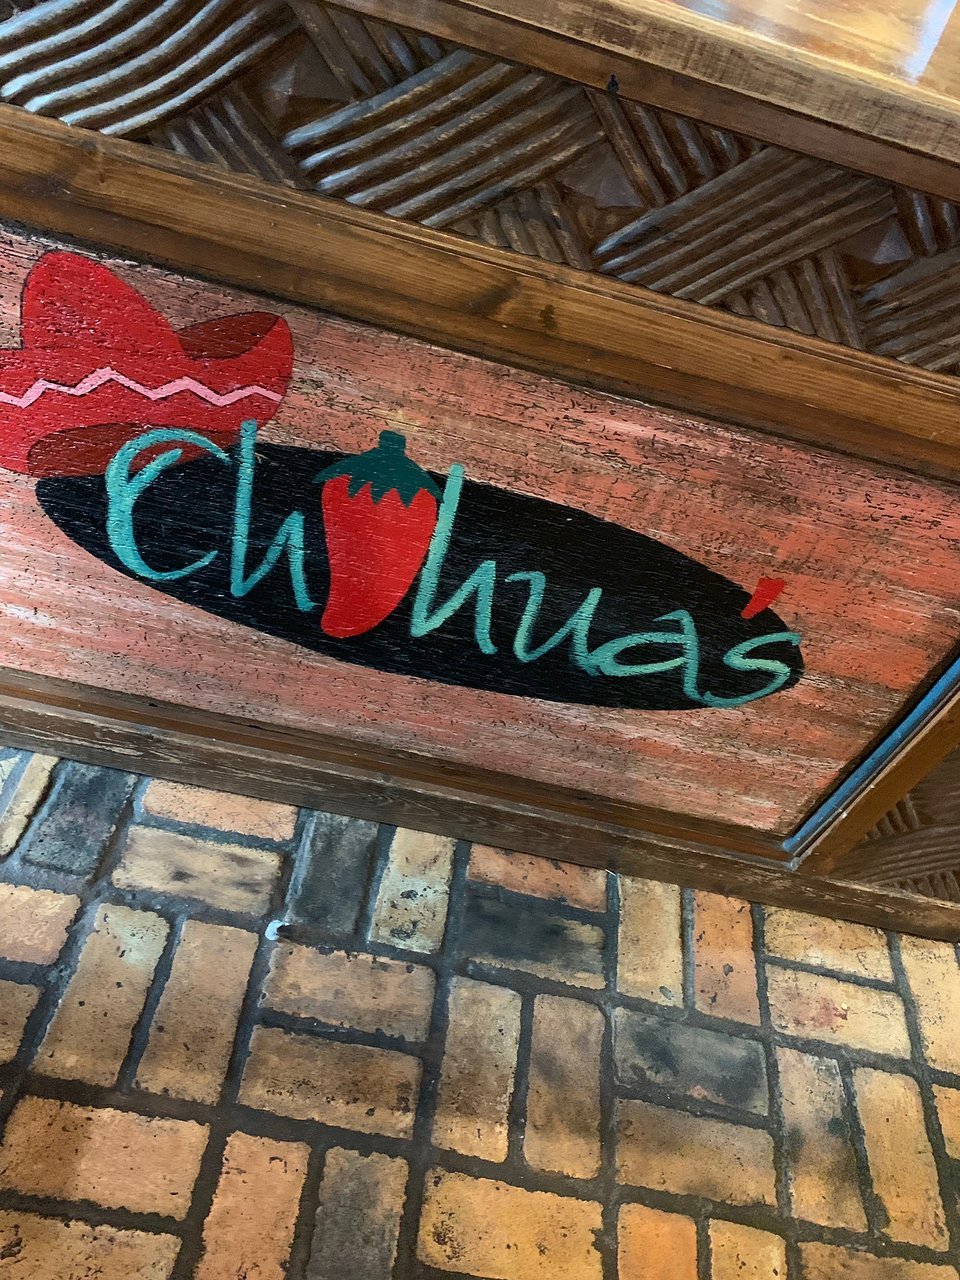 Chihua`s Mexican Restaurant